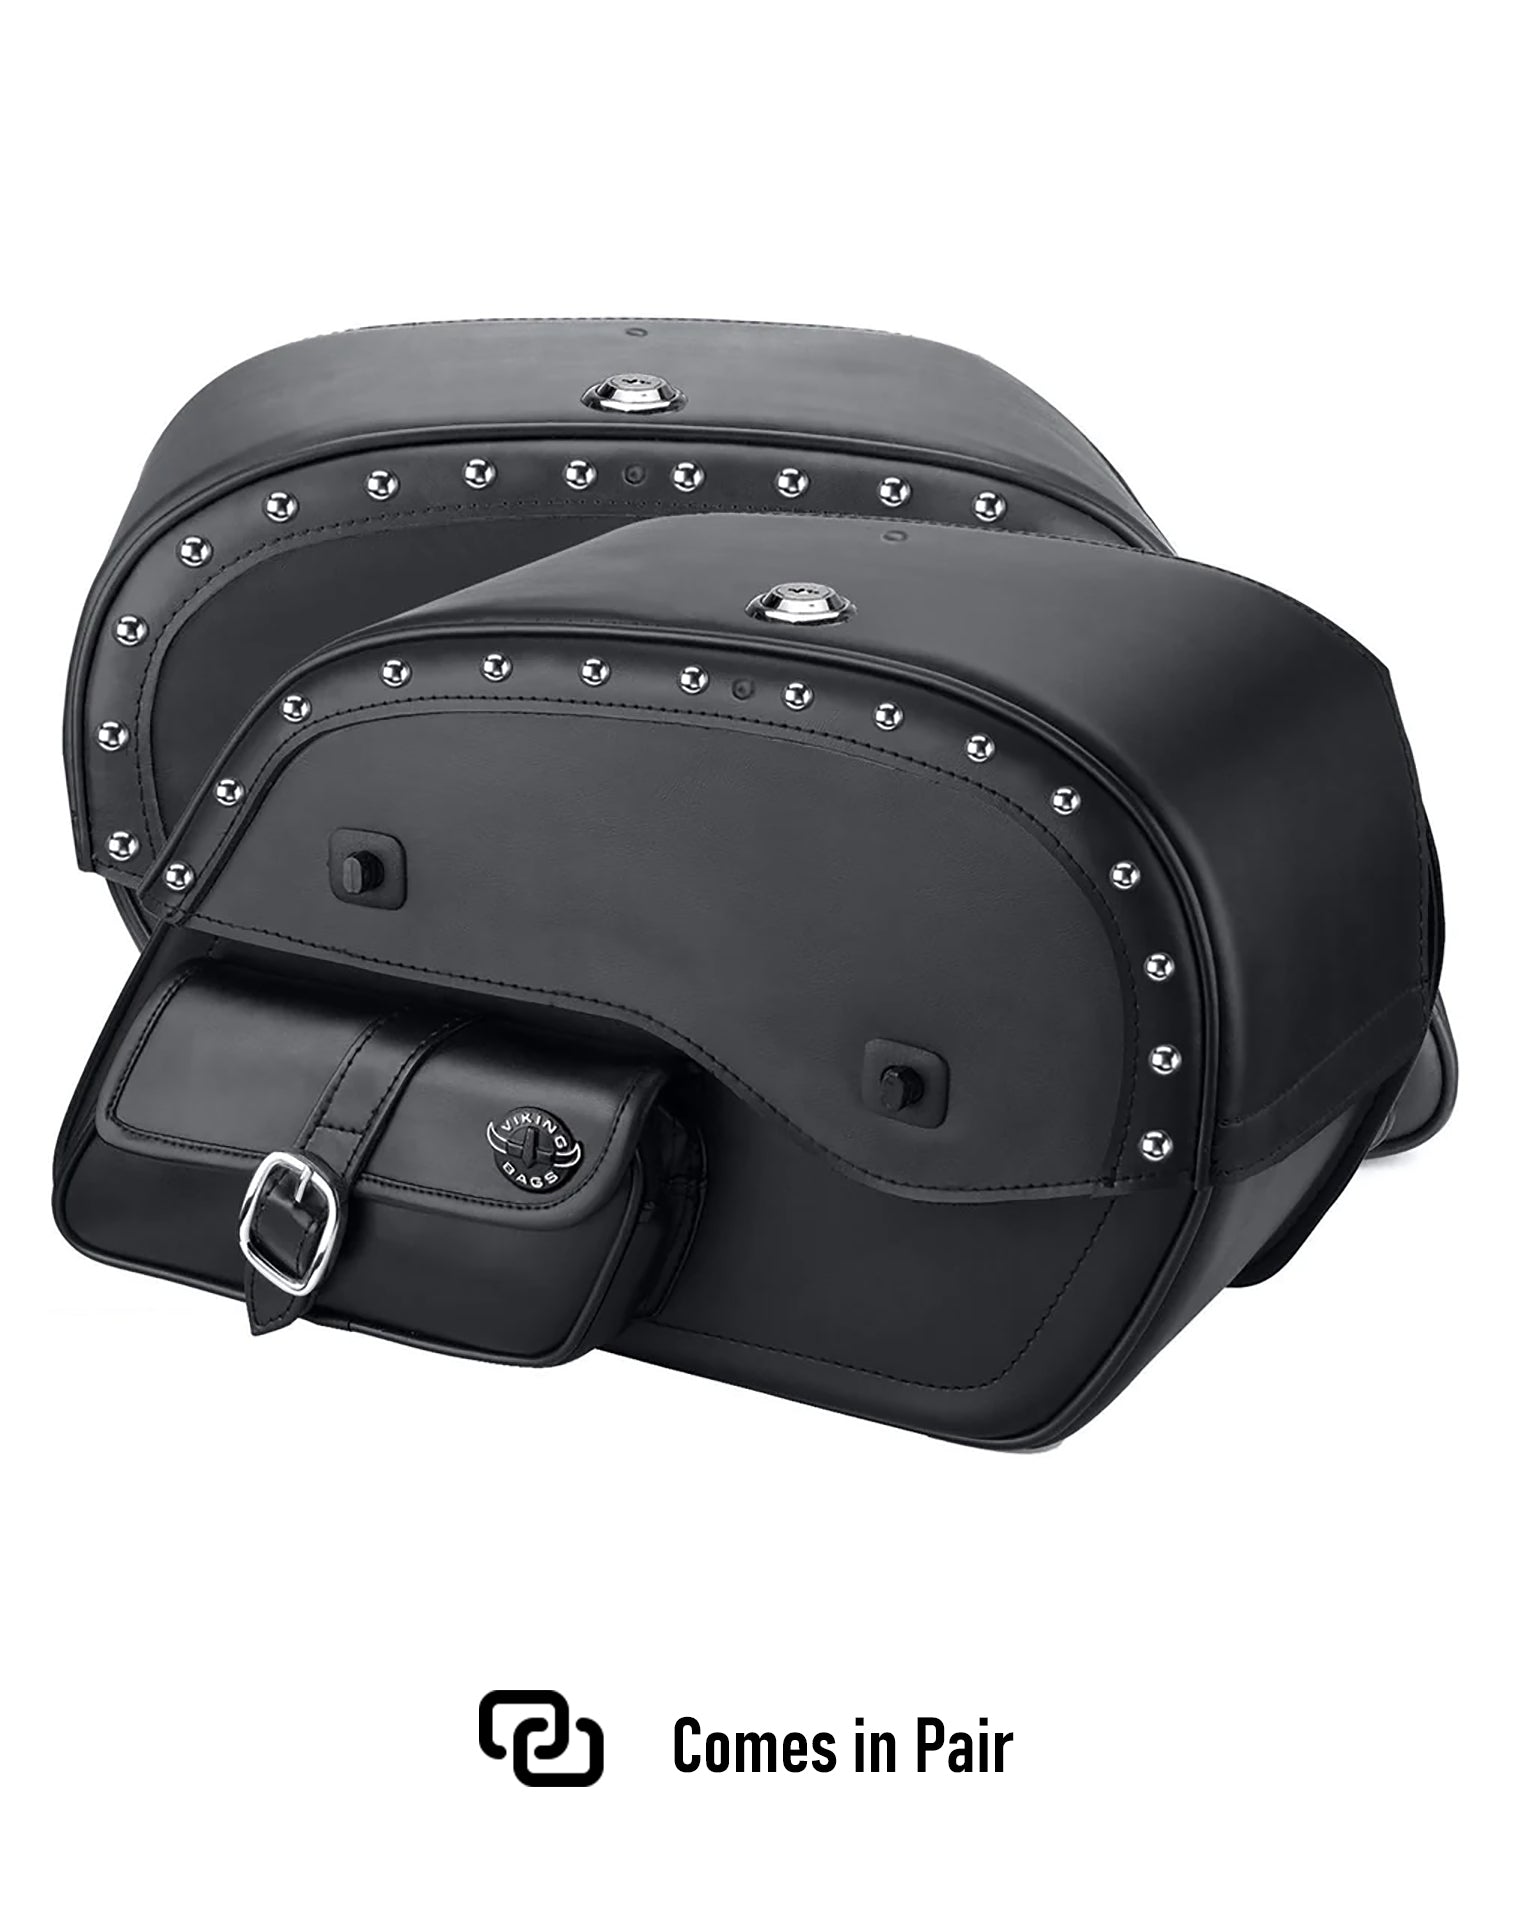 Viking Side Pocket Large Studded Kawasaki Vulcan 900 Classic Vn900 Leather Motorcycle Saddlebags Comes in Pair